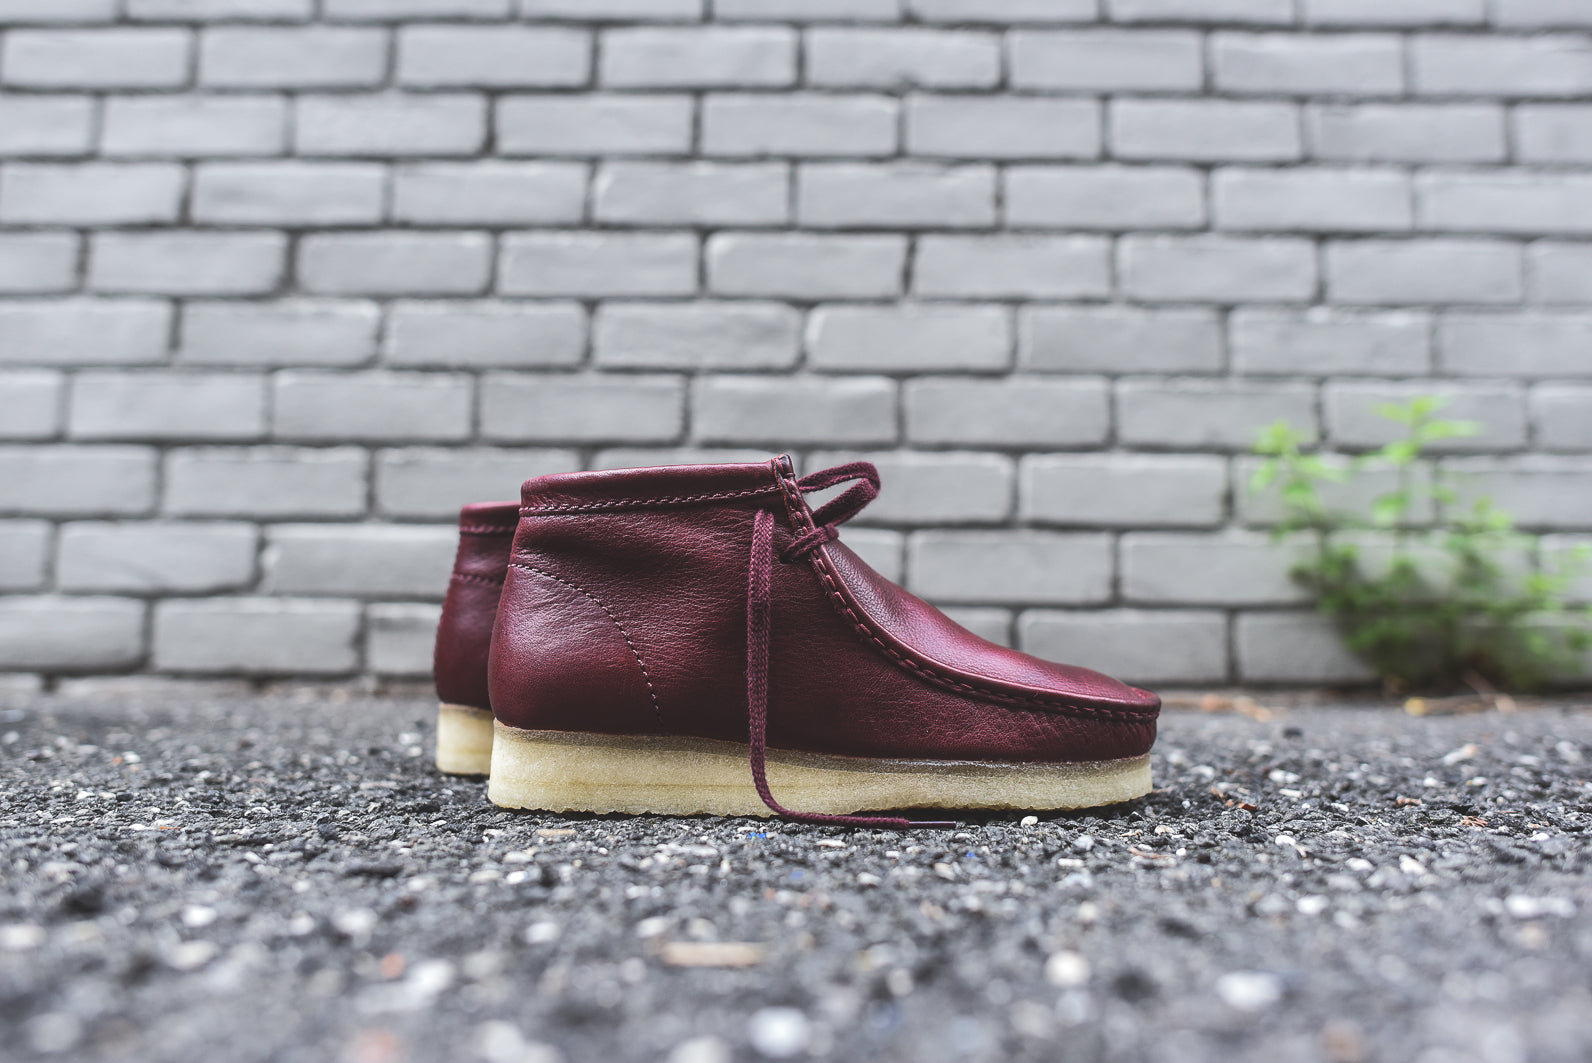 clarks winter shoes 2015